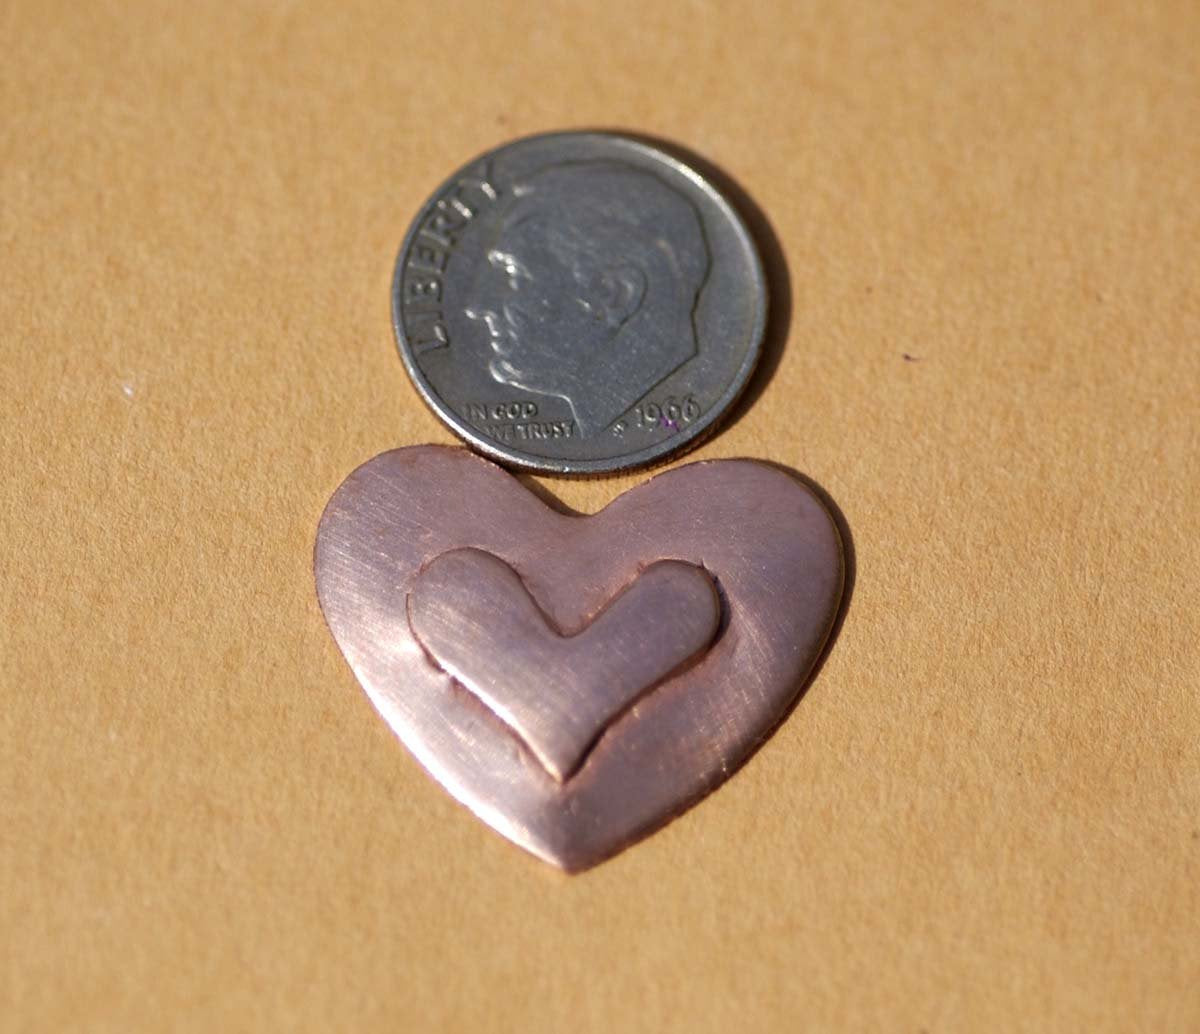 20.5mm x 24.7mm Heart with Embossed Blank for Enameling Stamping Texturing Metalworking Jewelry Making Blanks